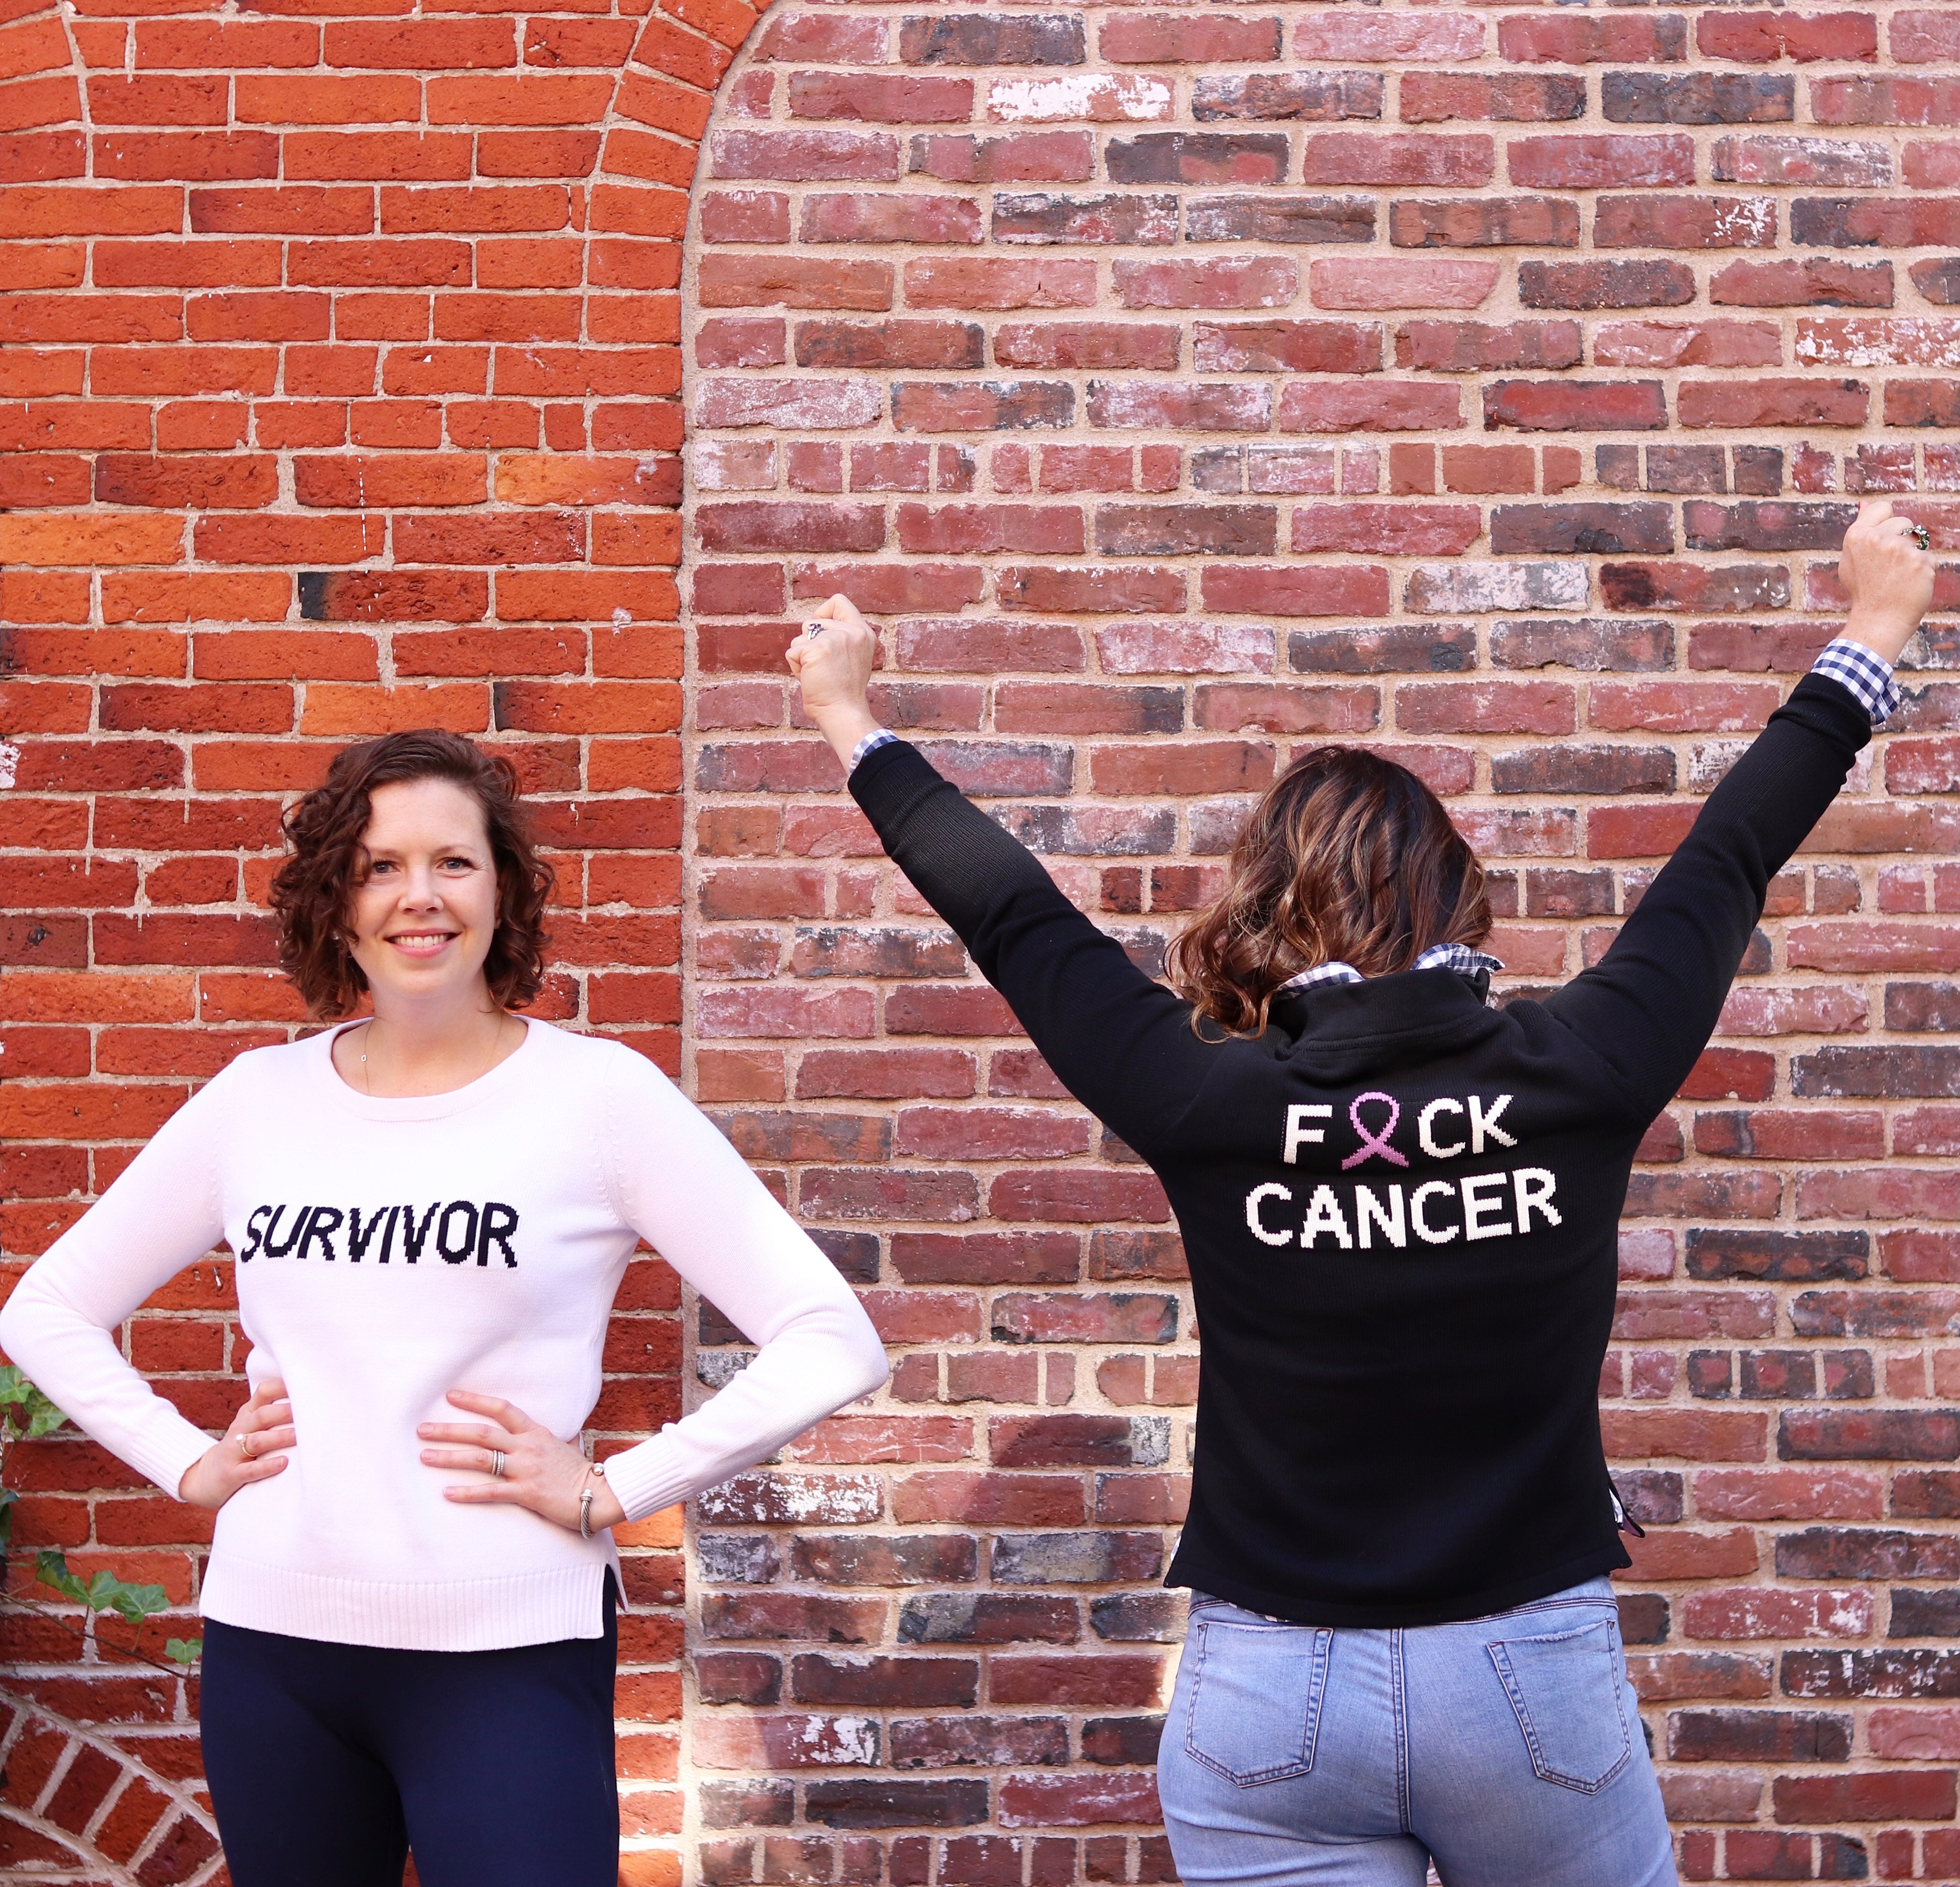 Fuck Cancer Zip Up- 25% of each sale goes to Runway For Recovery